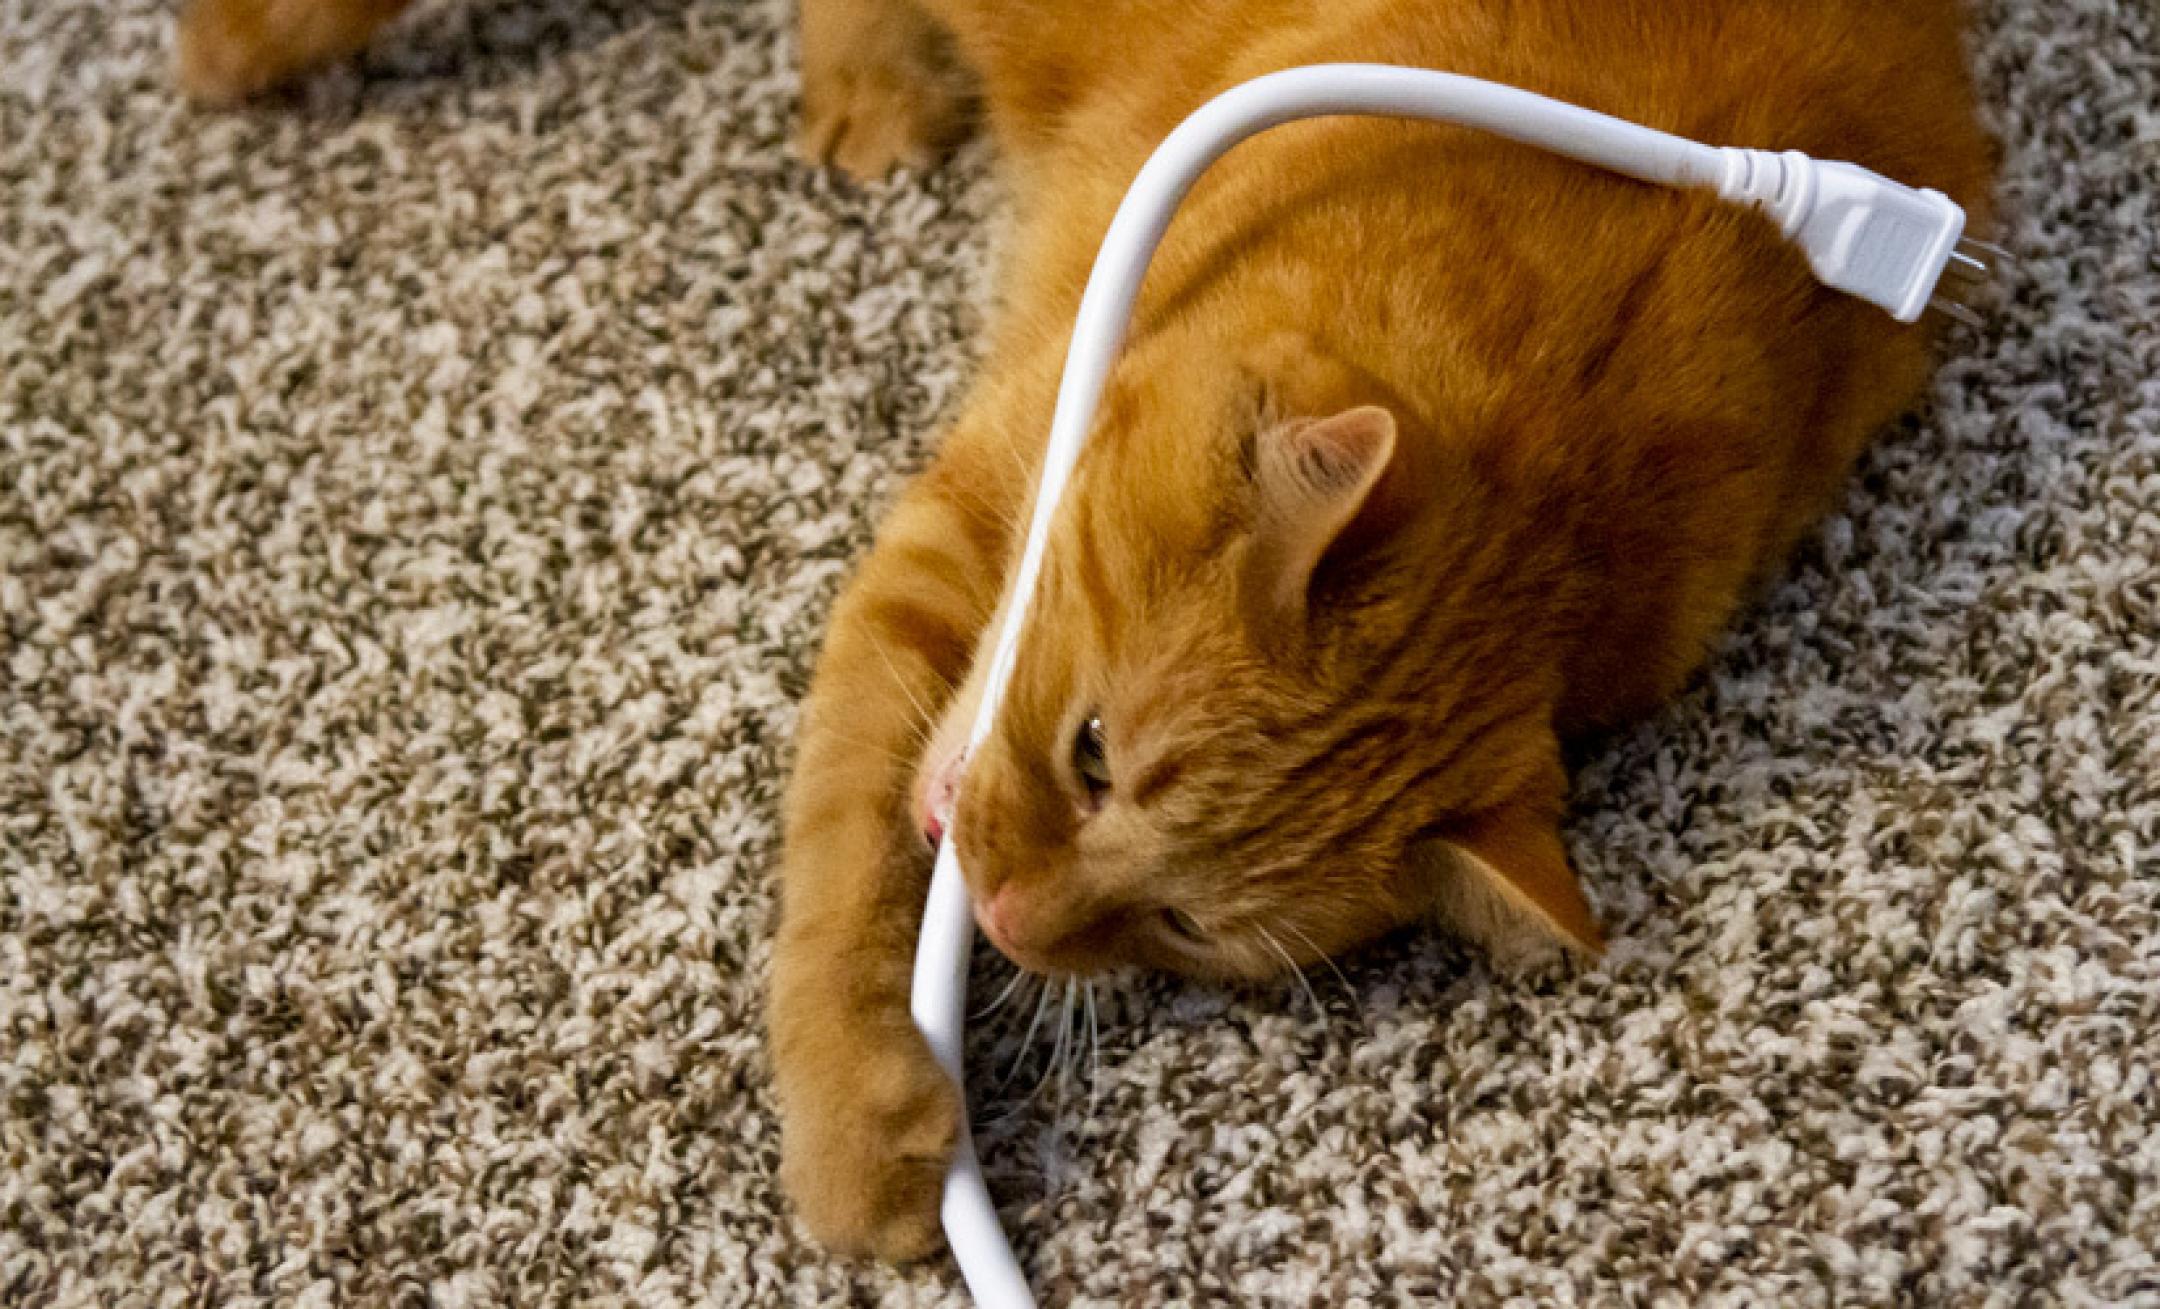 How to Keep Cats from Chewing on Cords